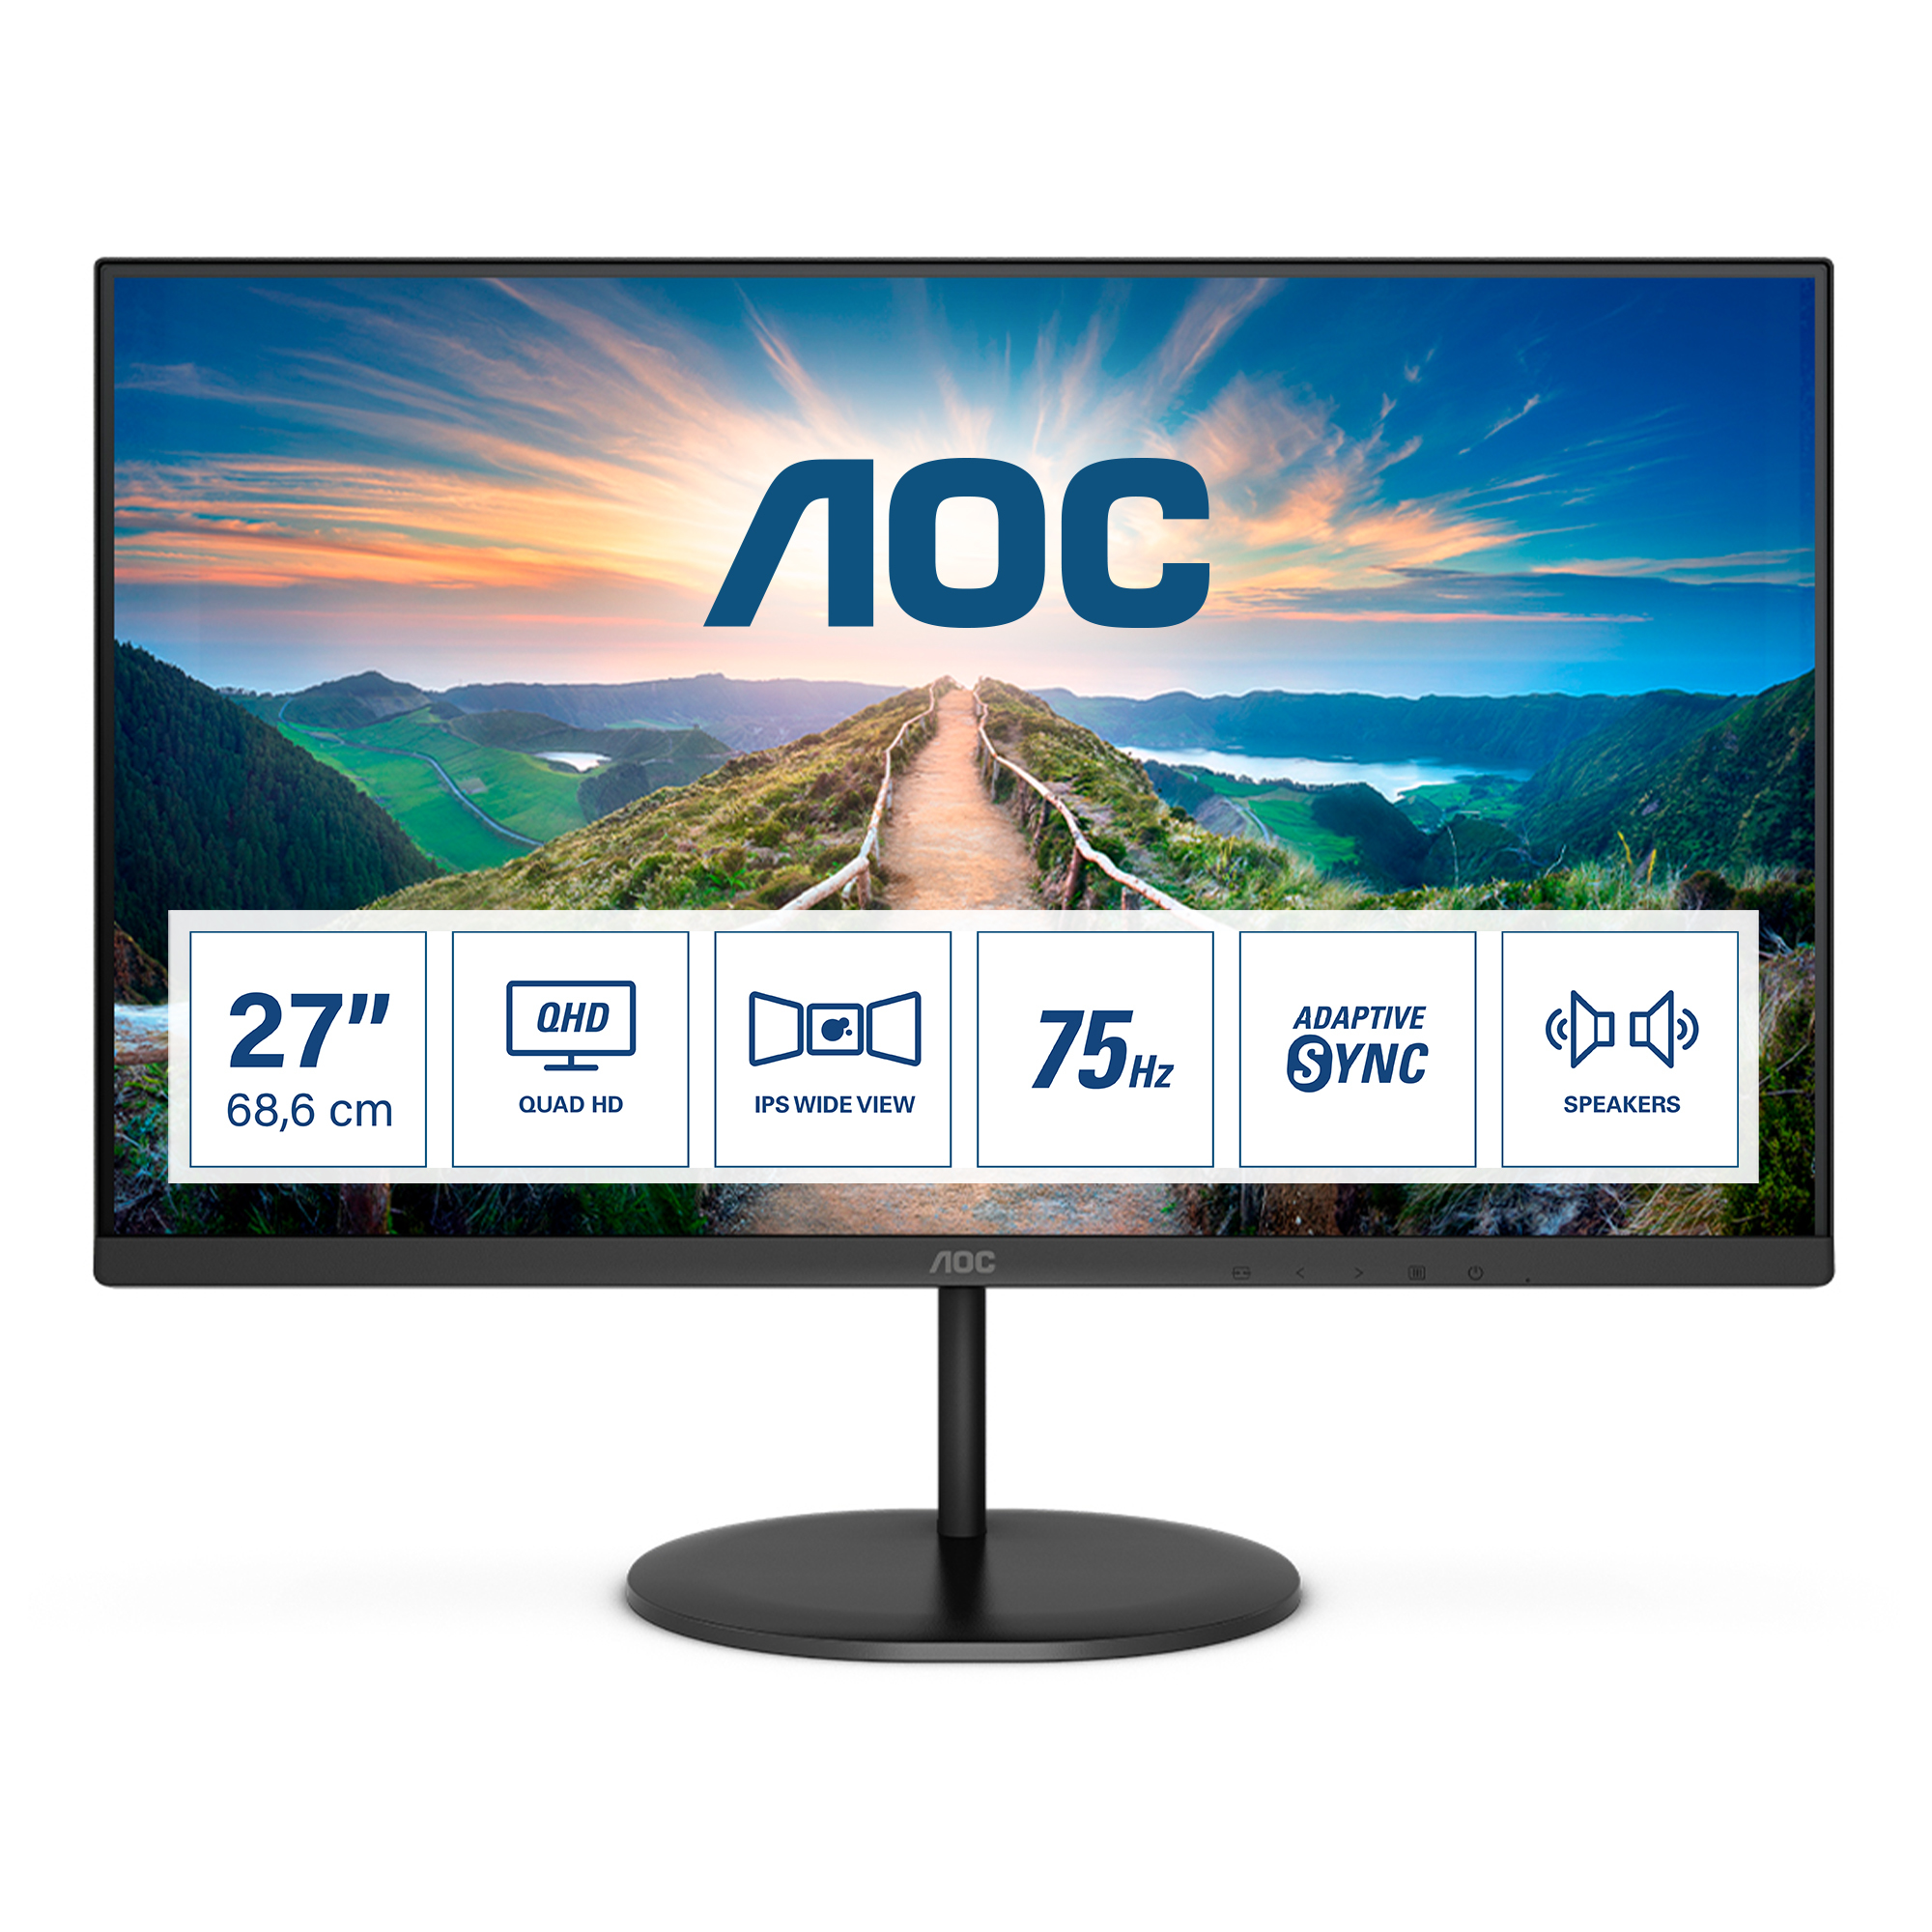 Screen size (inch) 27, Panel resolution 2560x1440, Refresh rate 75 Hz, Panel type IPS, HDMI HDMI 1.4 x 1, Display Port DisplayPort 1.2 x 1, Sync technology (VRR) Adaptive Sync